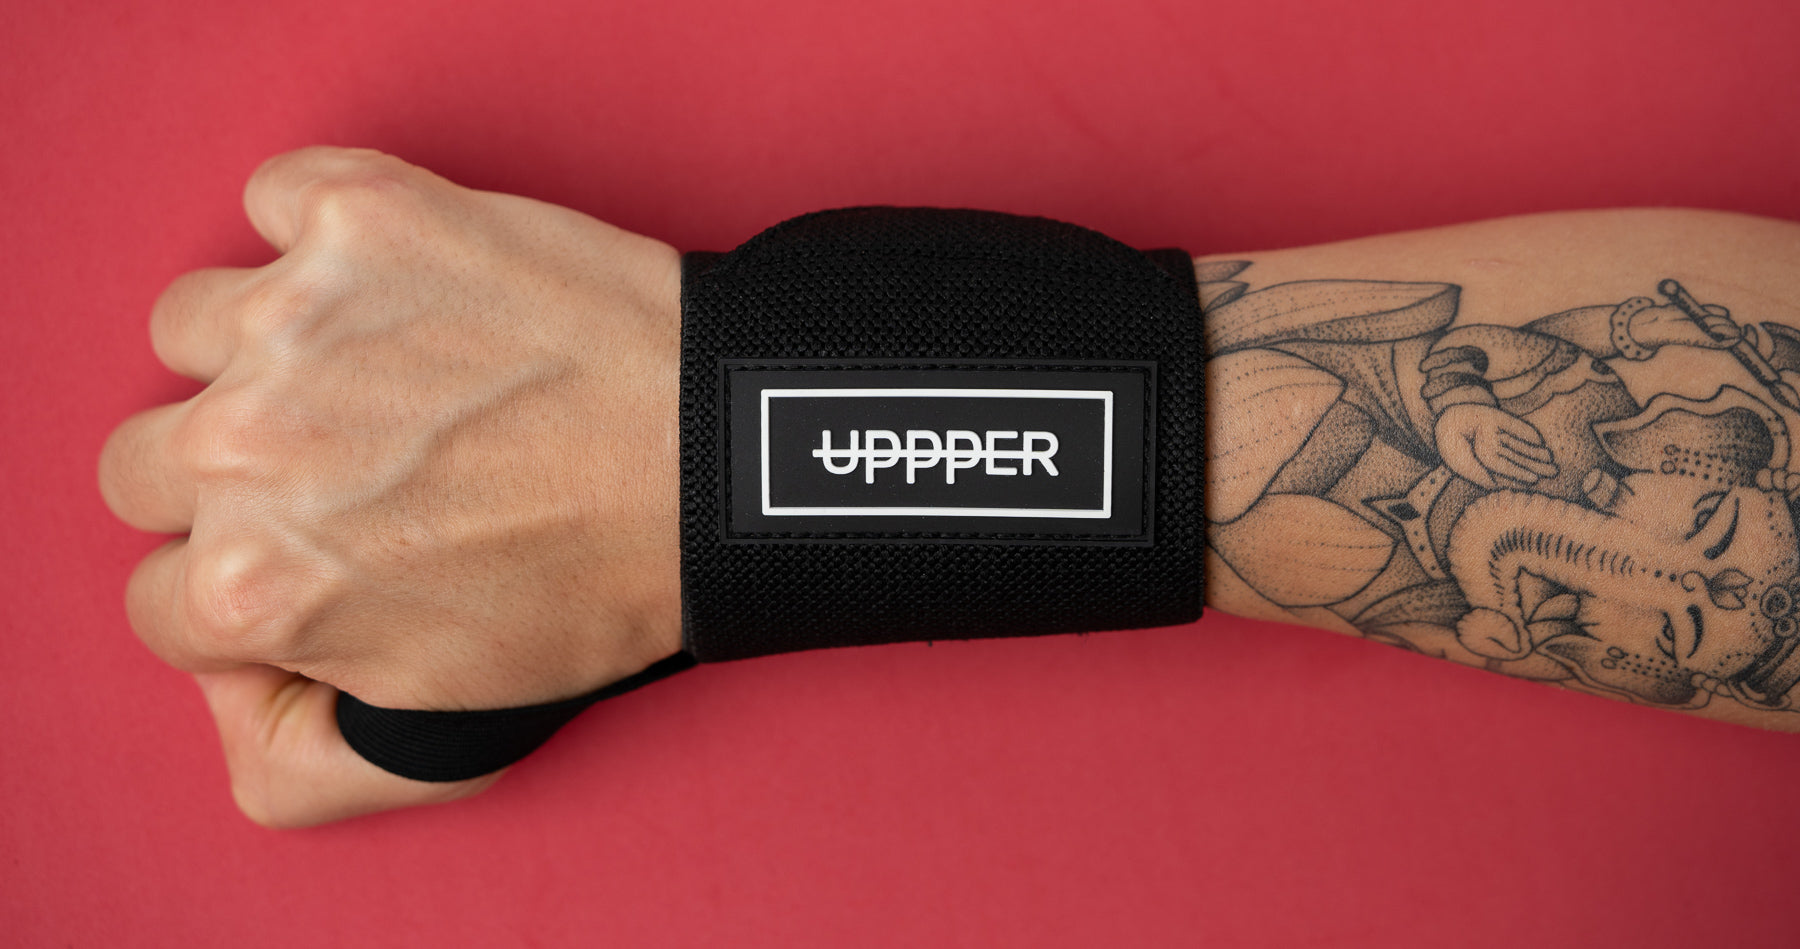 Wrist Wrap Guide: What are they, how, and when to use them